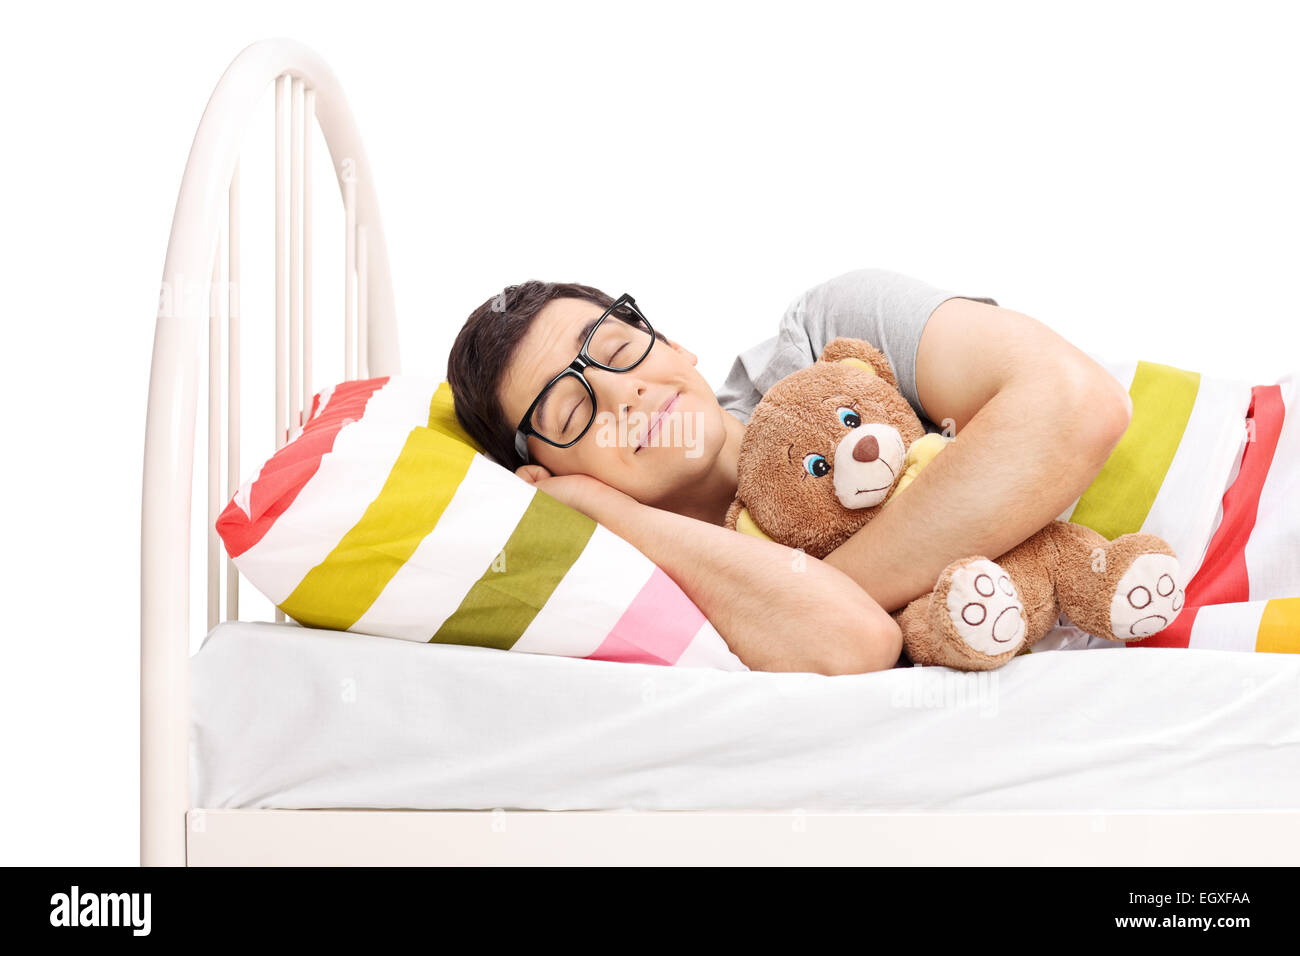 Childish young man sleeping with a teddy bear isolated on white background Stock Photo